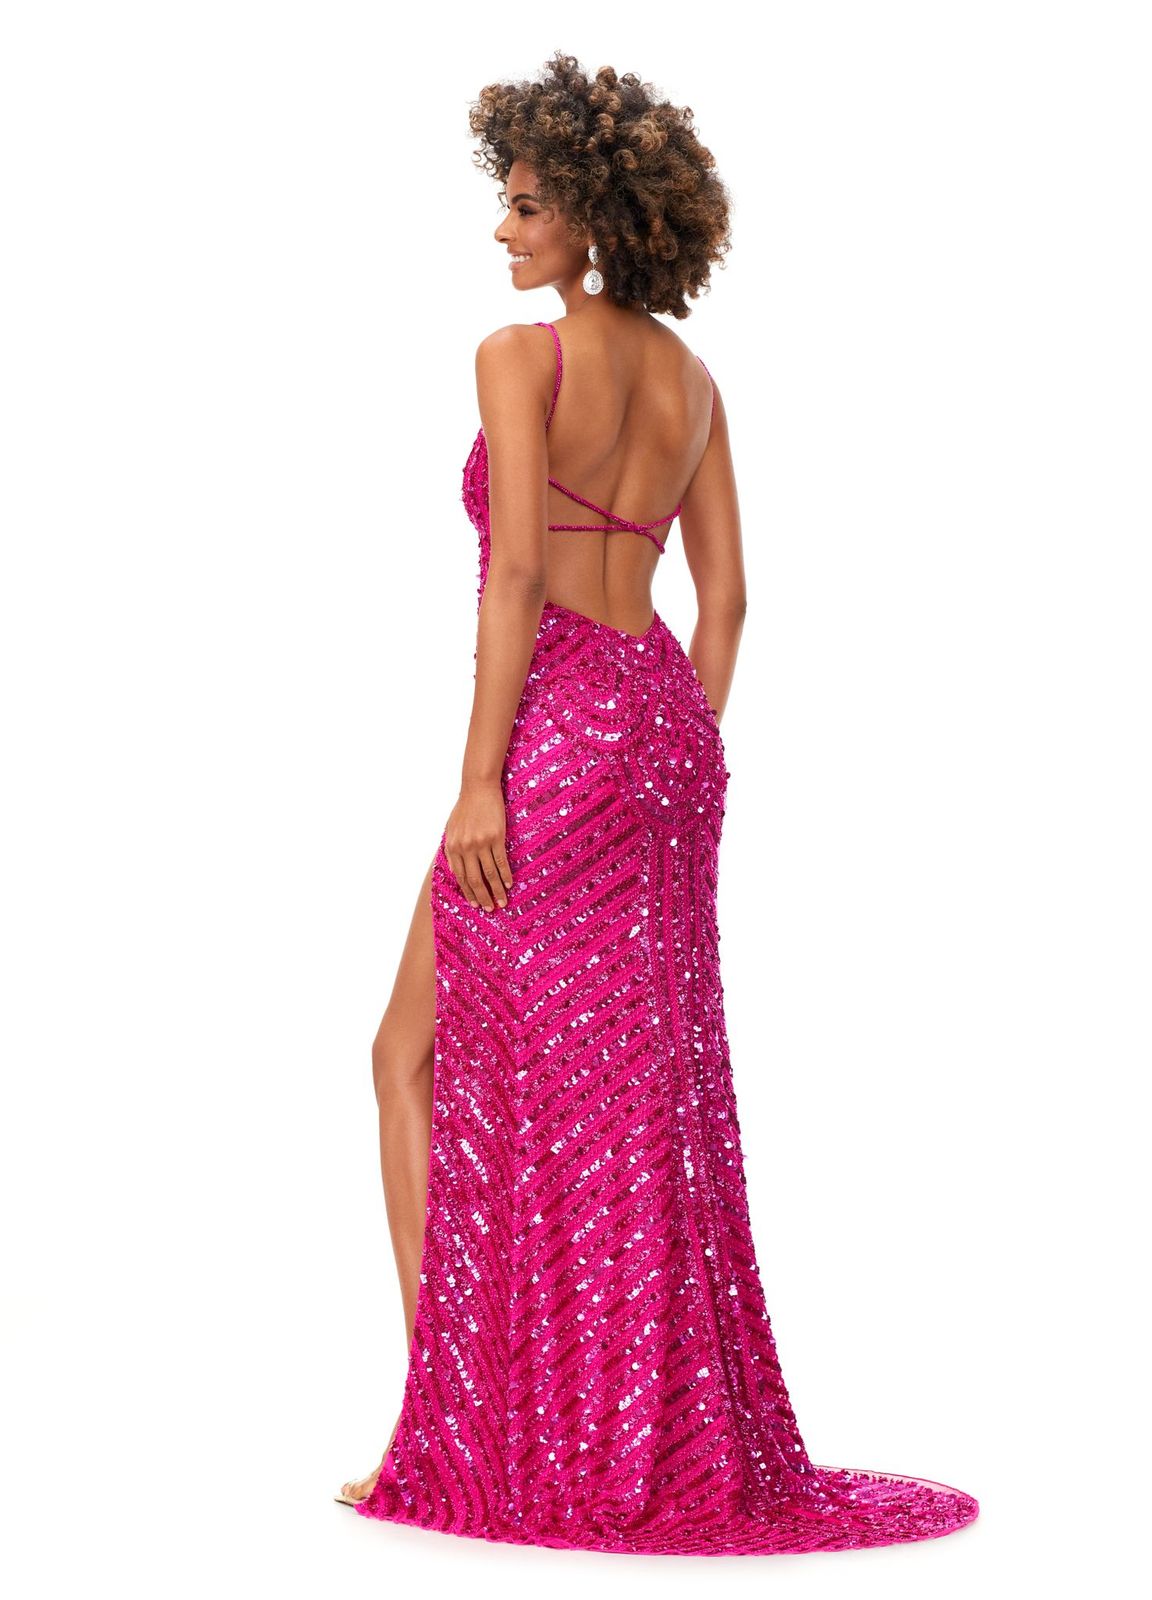 Ashley Lauren 11363 This stunning gown is hand beaded with sequins in an intricate, detailed pattern. Featuring an open back and spaghetti straps, the dress is complete with a left leg slit. Sweetheart Neckline Spaghetti Straps Open Back Left Leg Slit COLORS: Hot Pink, Red, Black, Gold